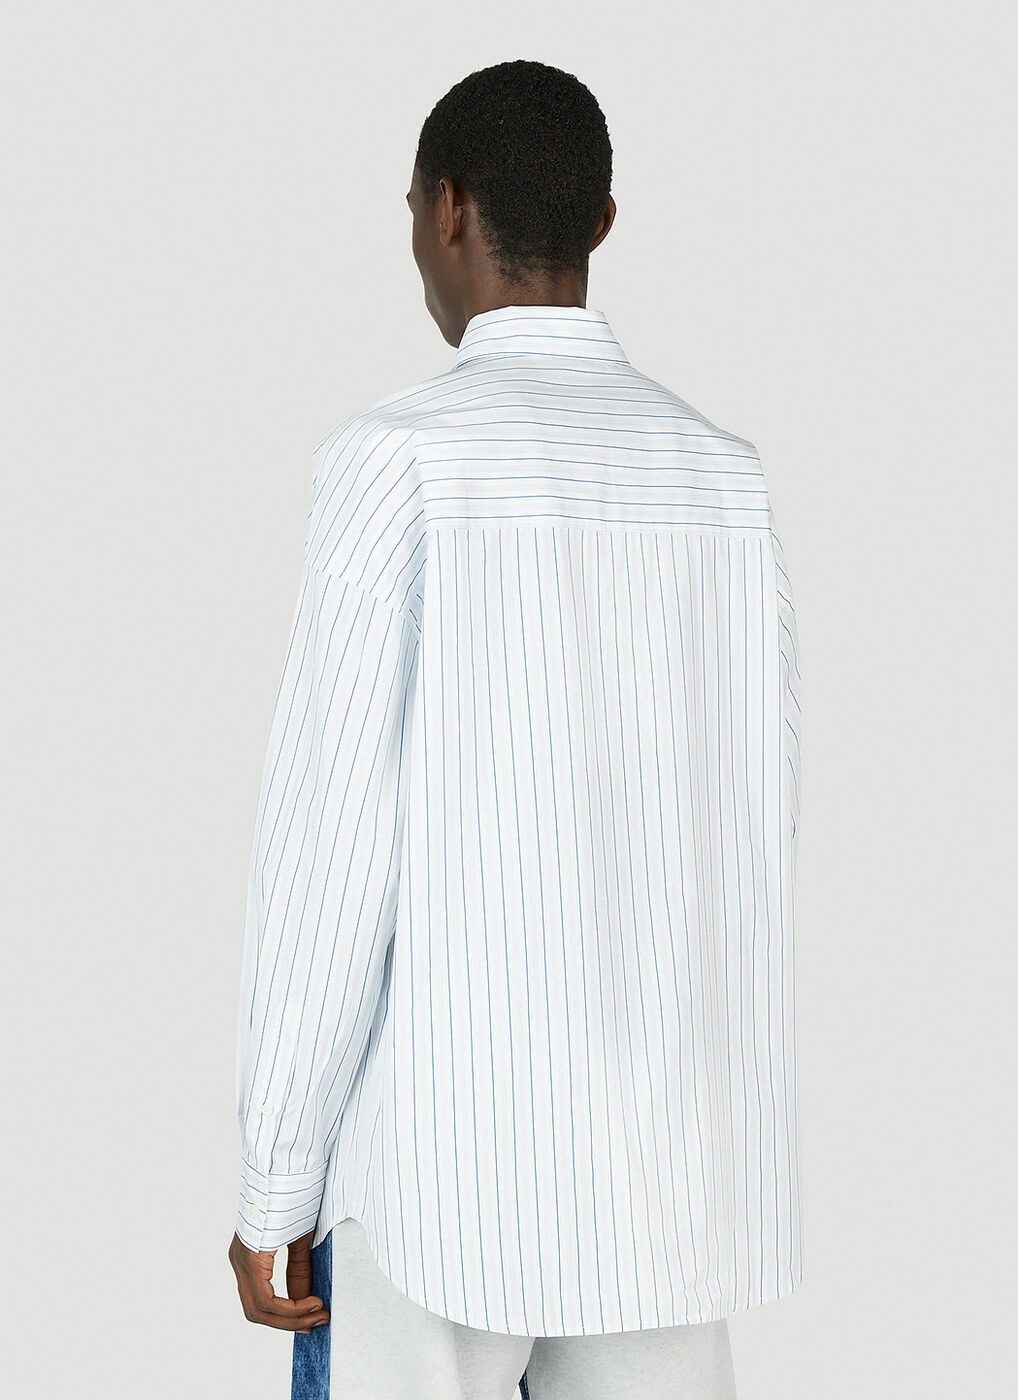 Diesel - S-Doubly Striped Shirt in White Diesel